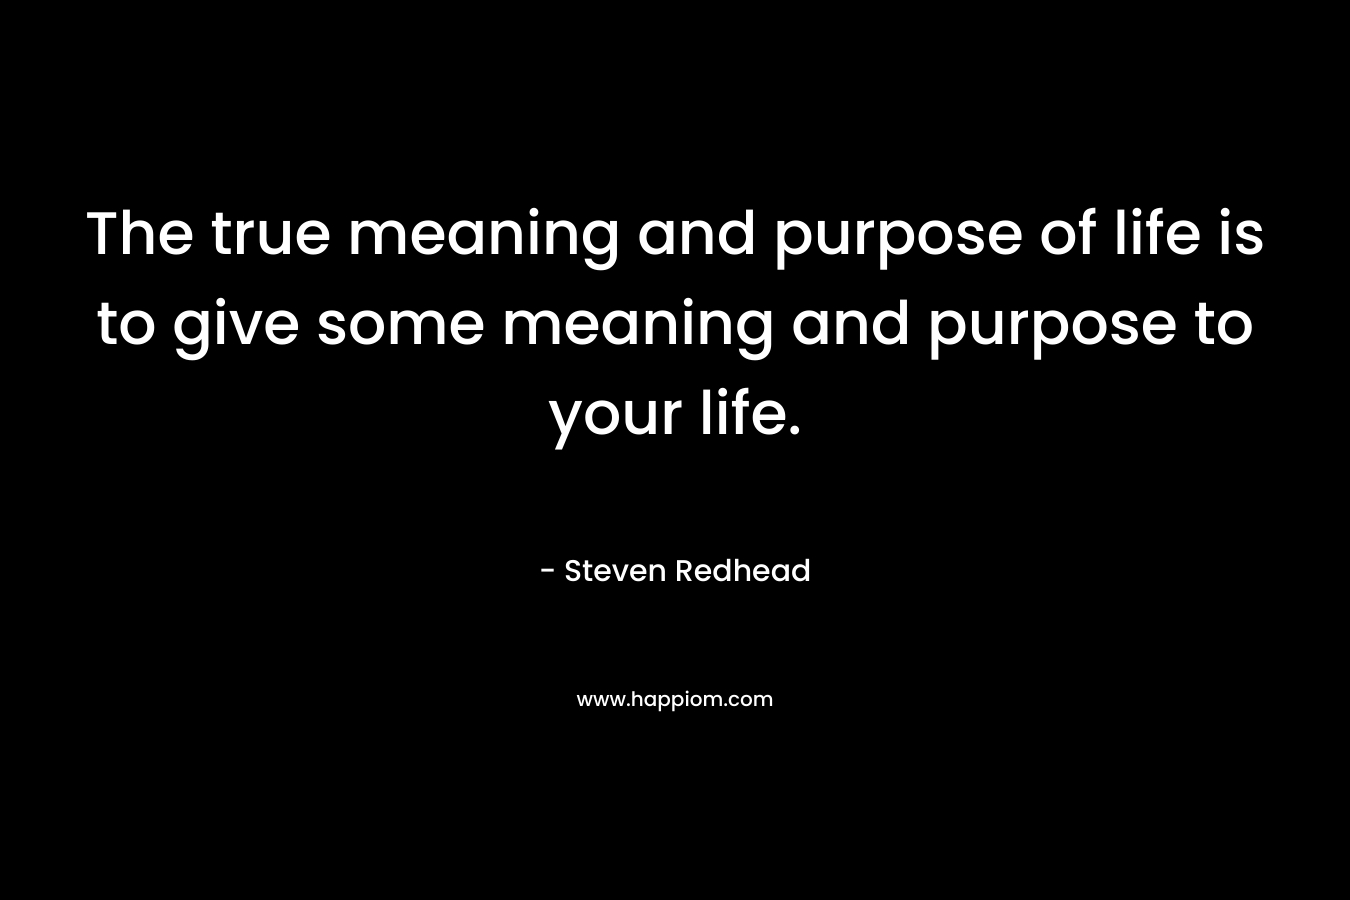 The true meaning and purpose of life is to give some meaning and purpose to your life.